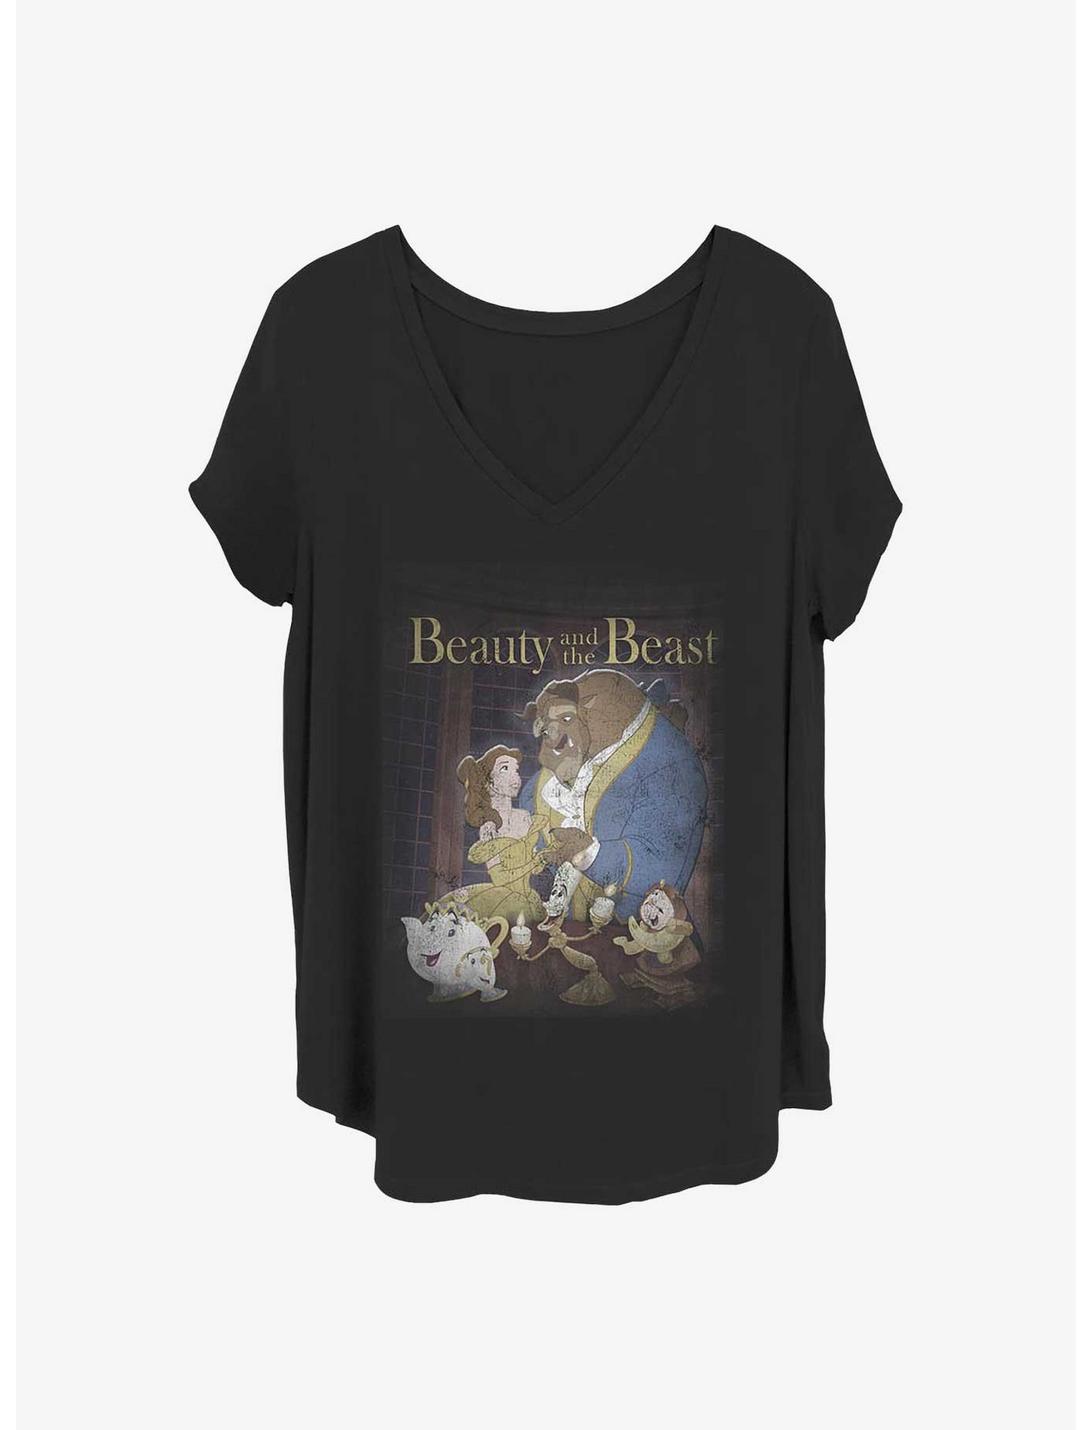 Disney Beauty and the Beast Poster Girls T-Shirt Plus Size, BLACK, hi-res